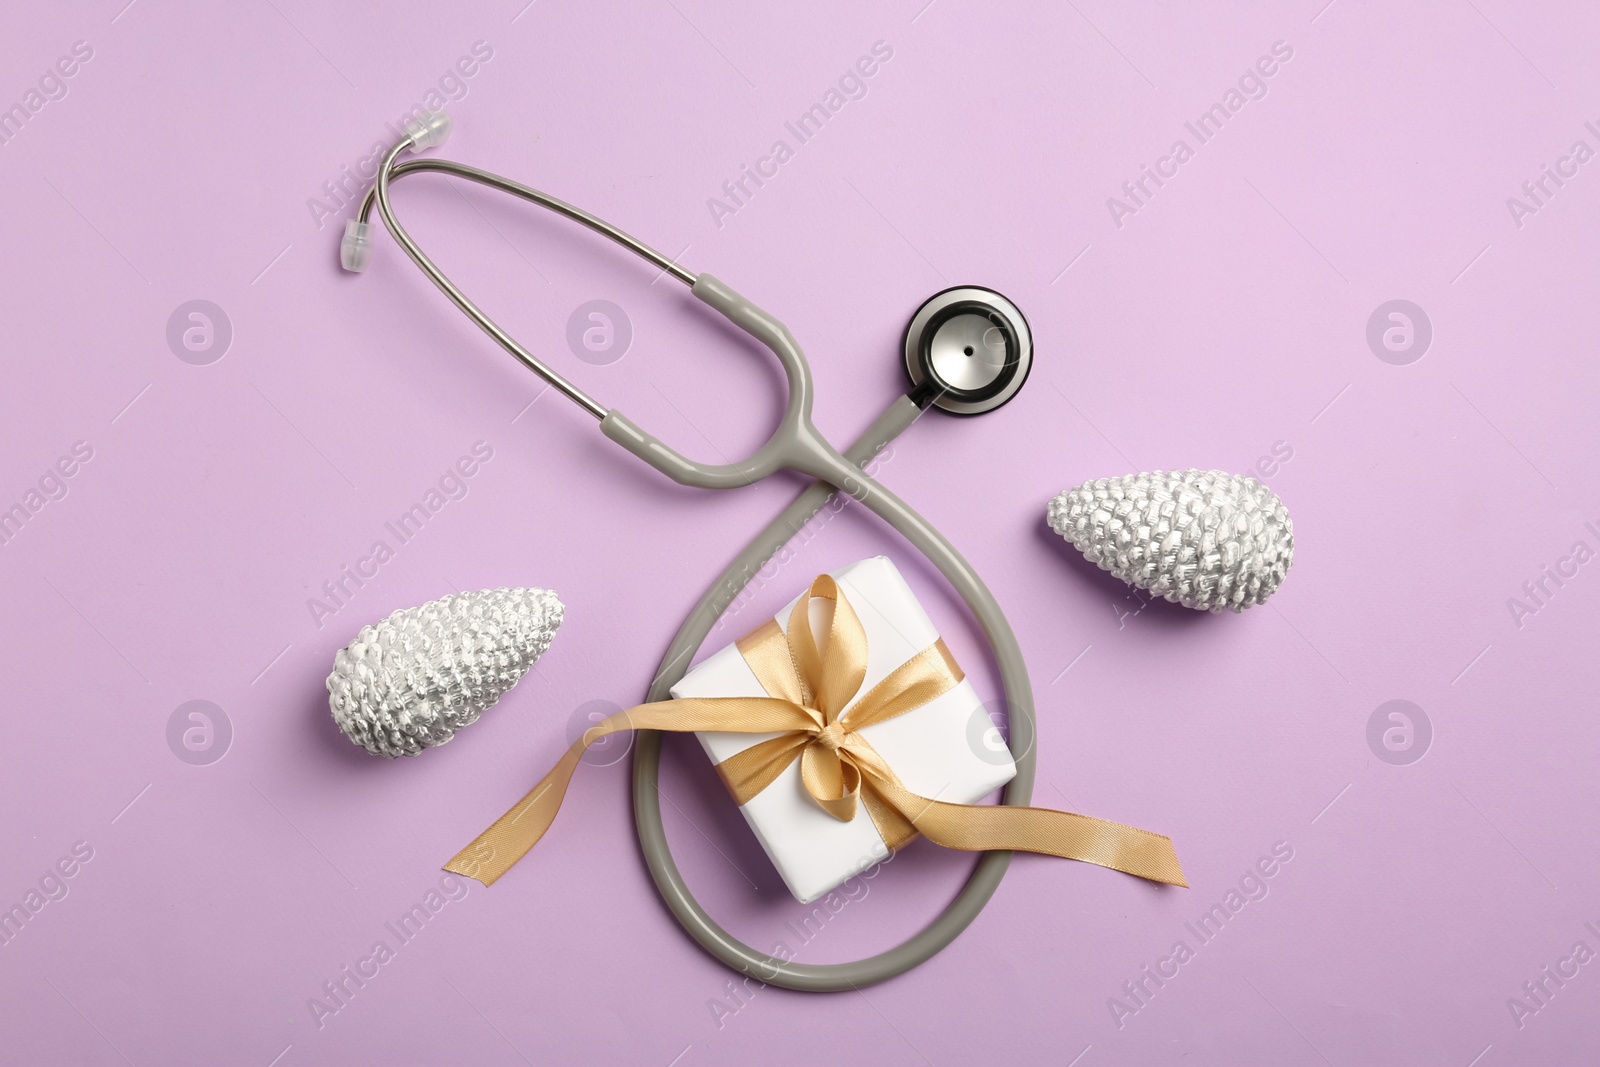 Photo of Greeting card for doctor with stethoscope, gift box and Christmas decor on purple background, flat lay